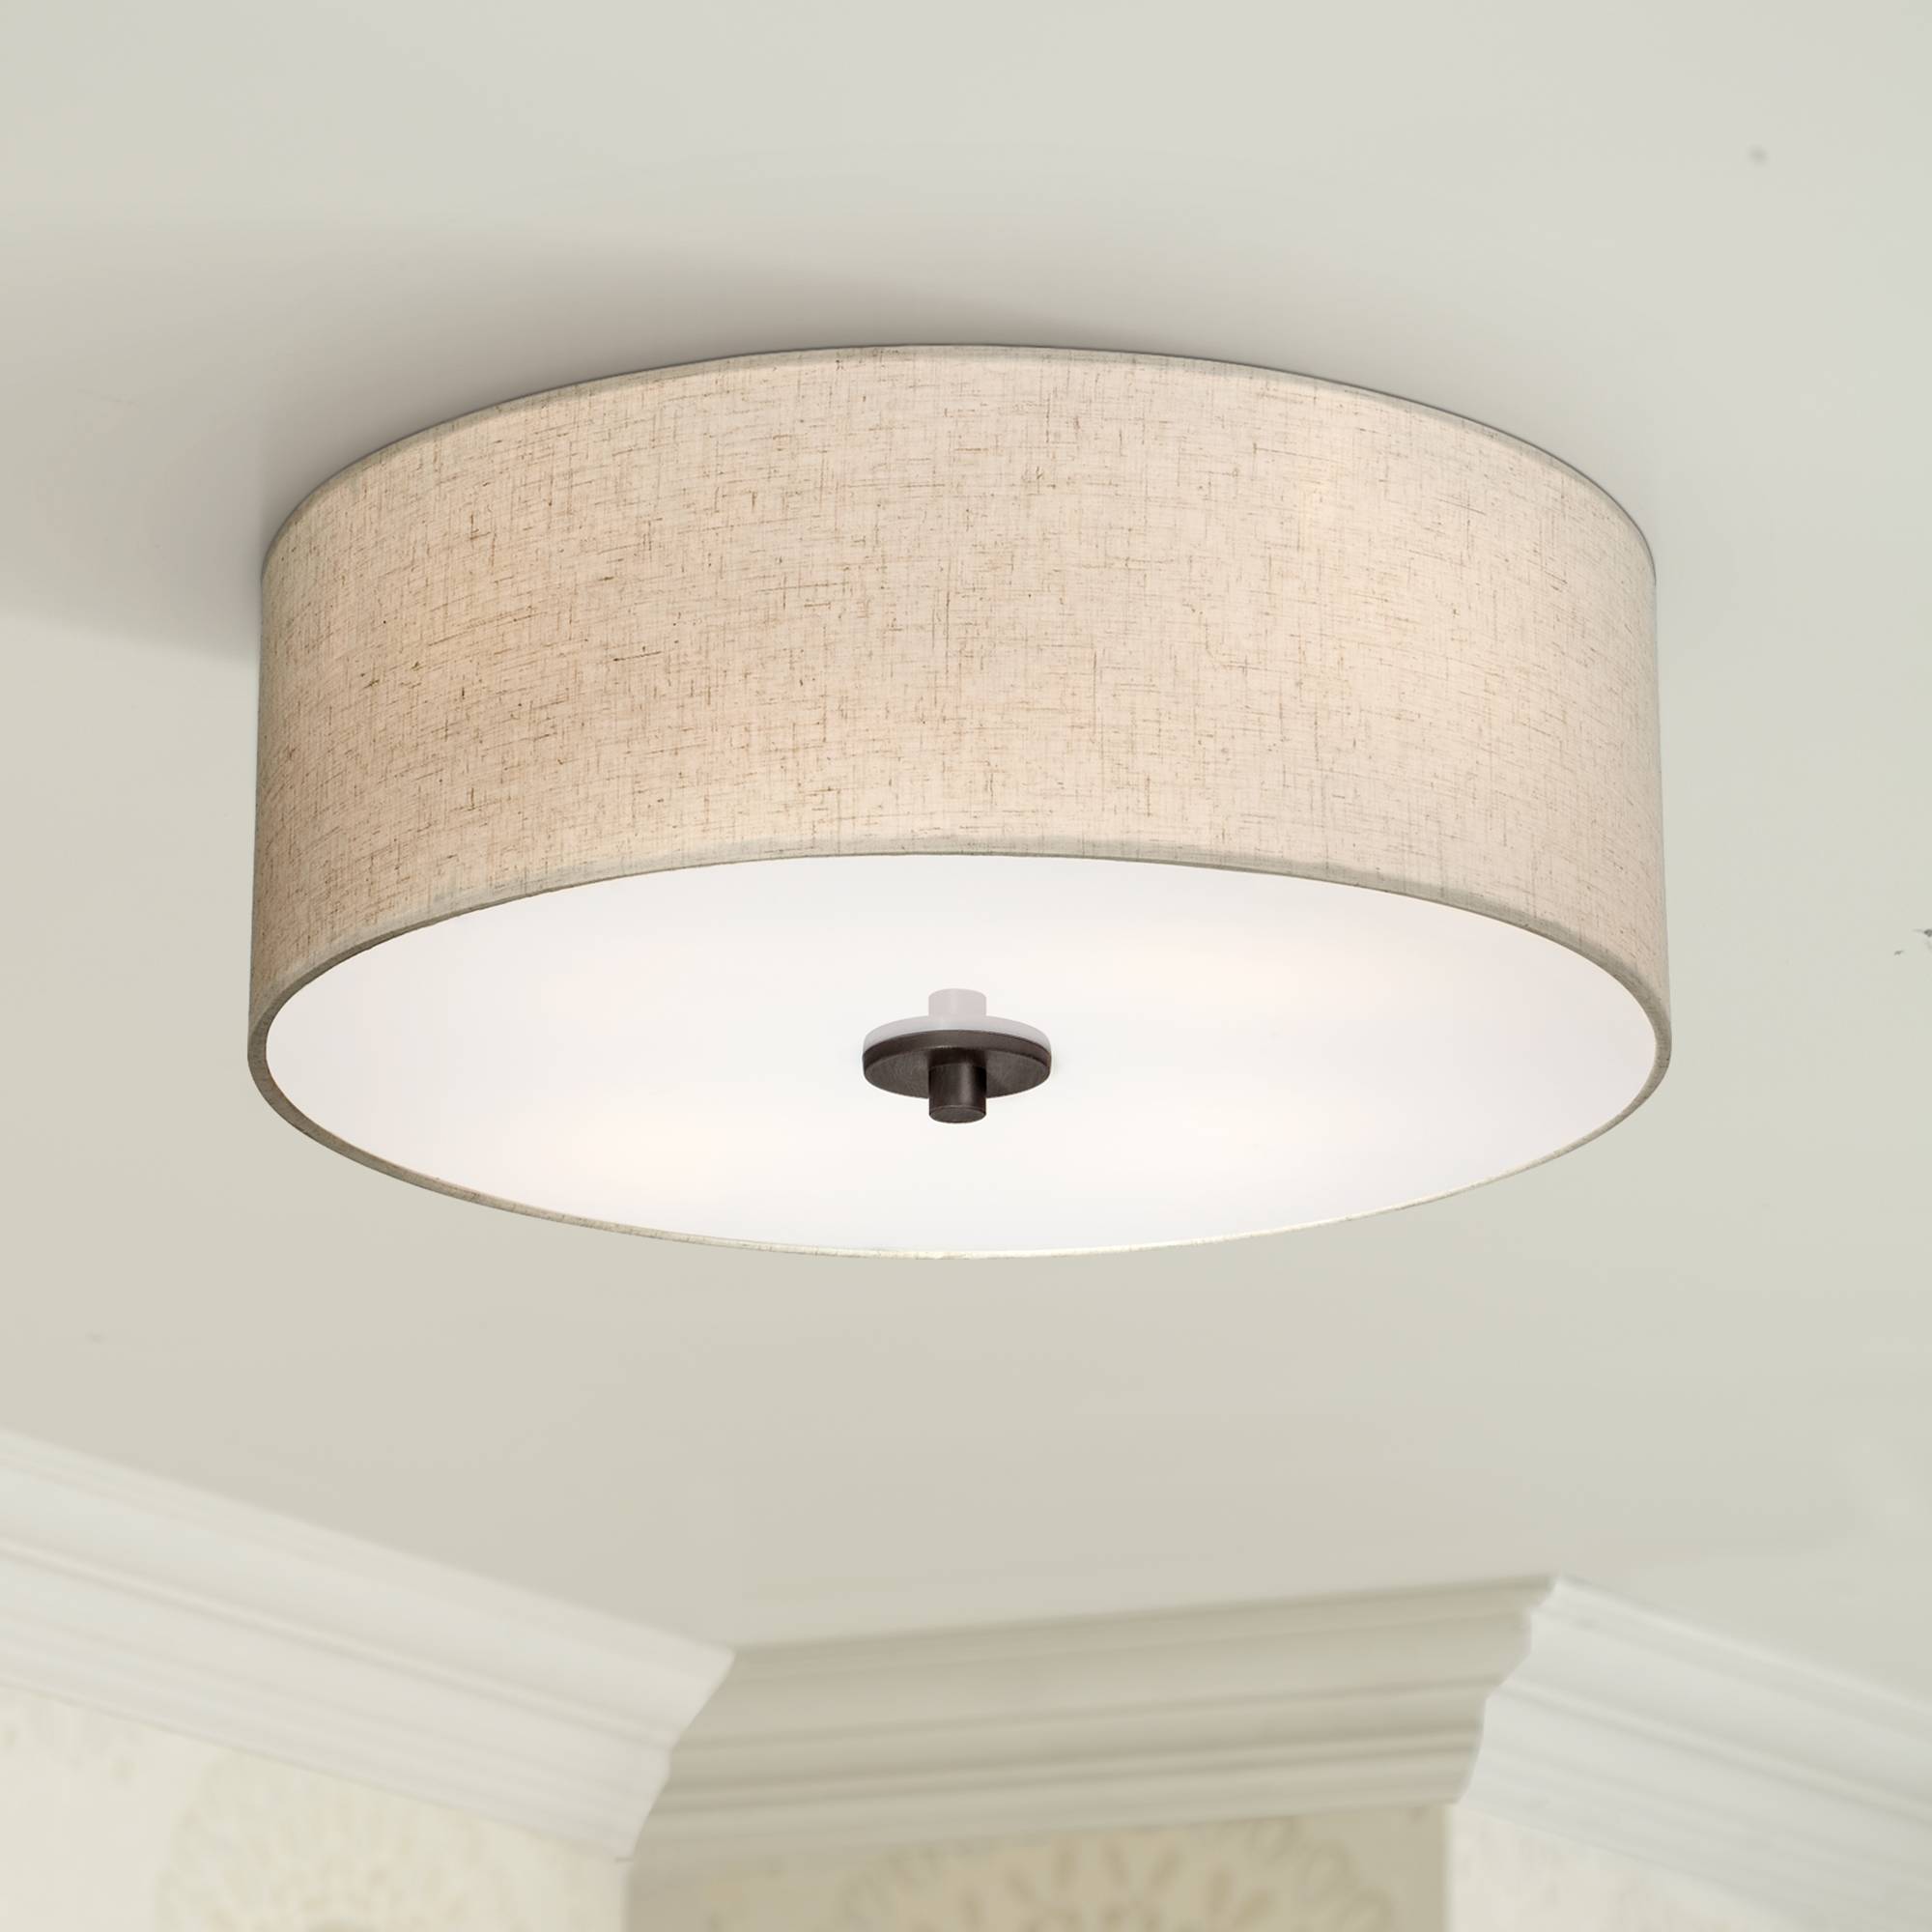 Details About Ceiling Light Fixture Flush Mount Drum Shade Off White 18 Wide Bedroom Kitchen